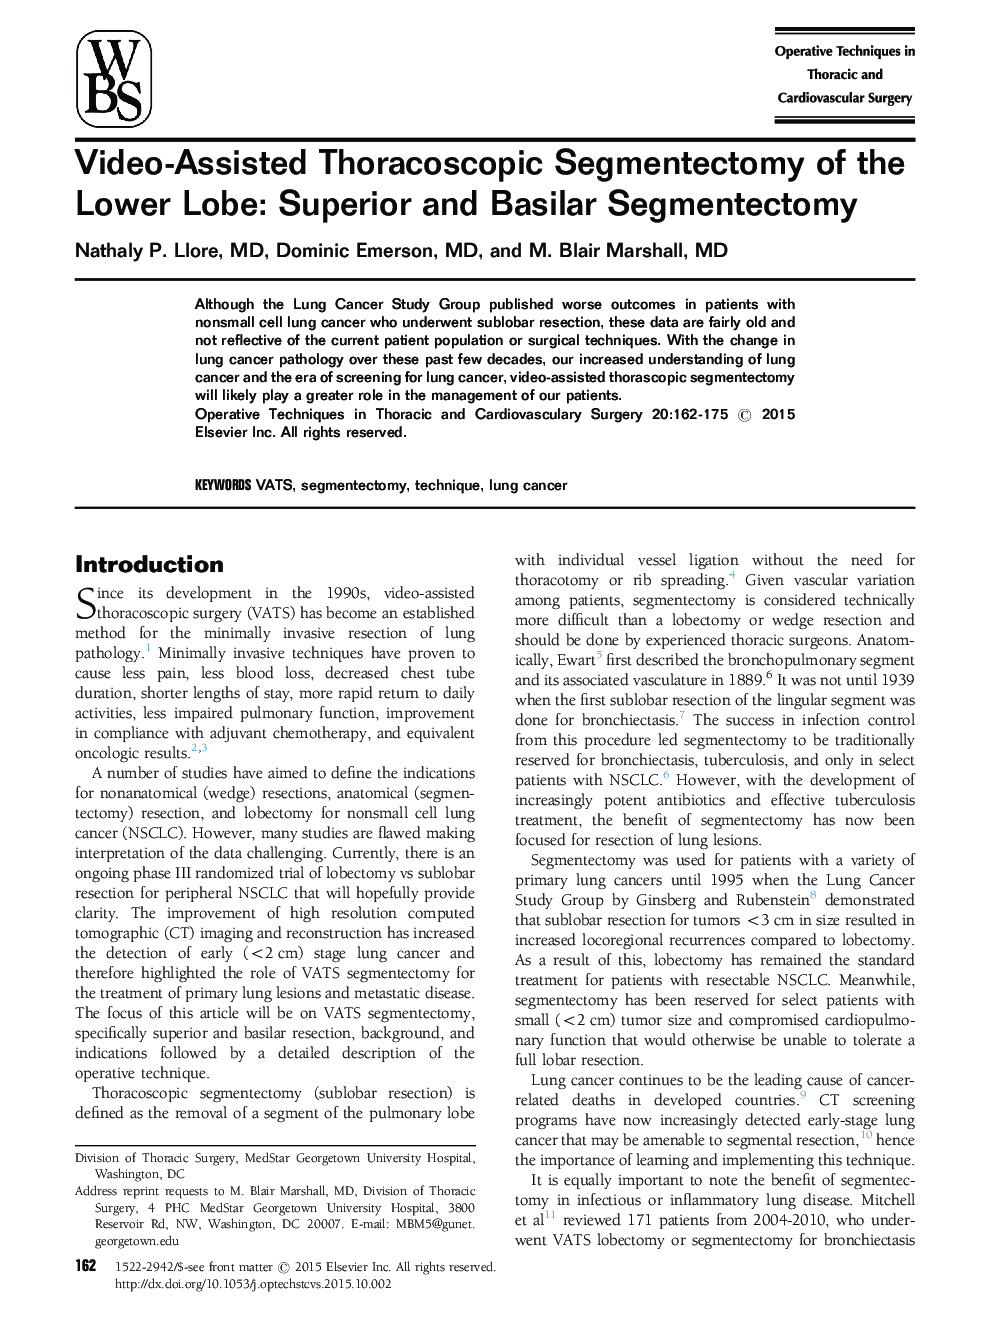 Video-Assisted Thoracoscopic Segmentectomy of the Lower Lobe: Superior and Basilar Segmentectomy